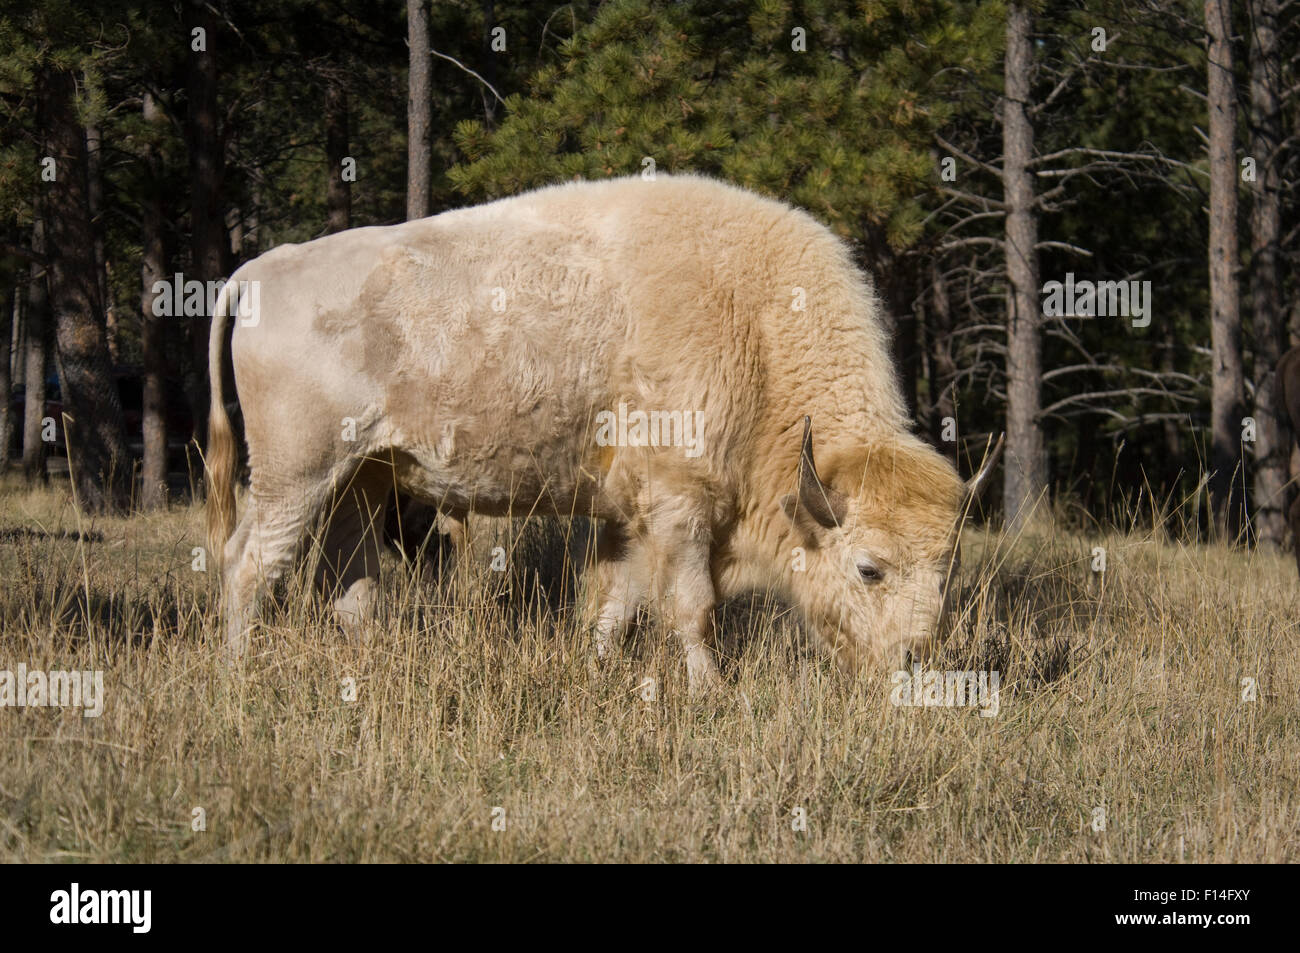 WHITE BISON SYMBOL OF HOPE AND RENEWAL TO MANY NATIVE AMERICAN TRIBES Stock Photo